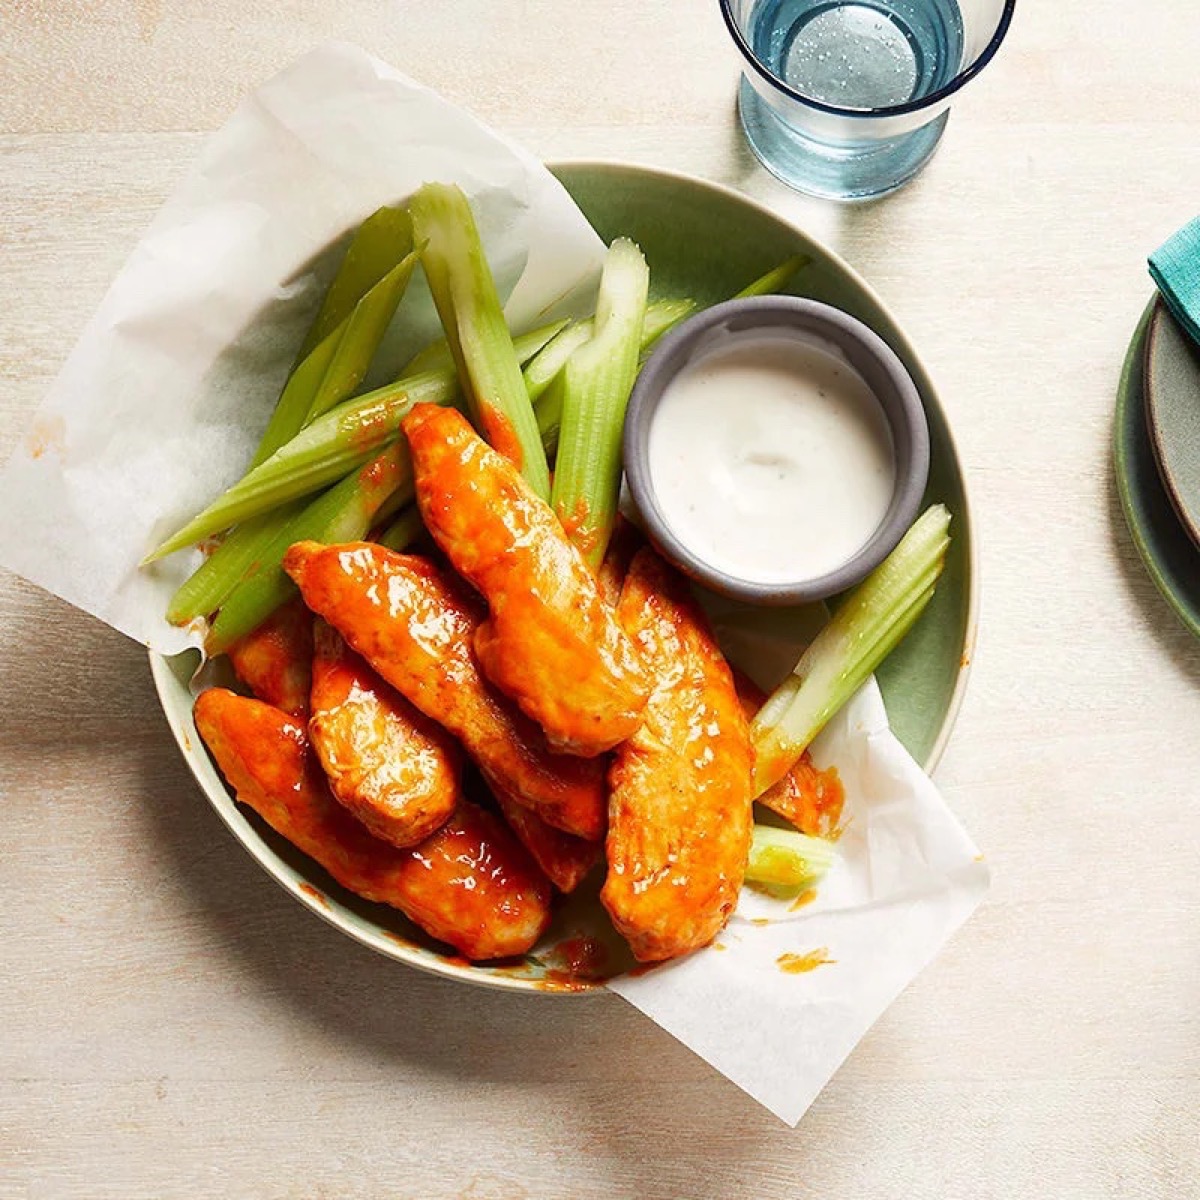 buffalo chicken fingers with celery and blue cheese